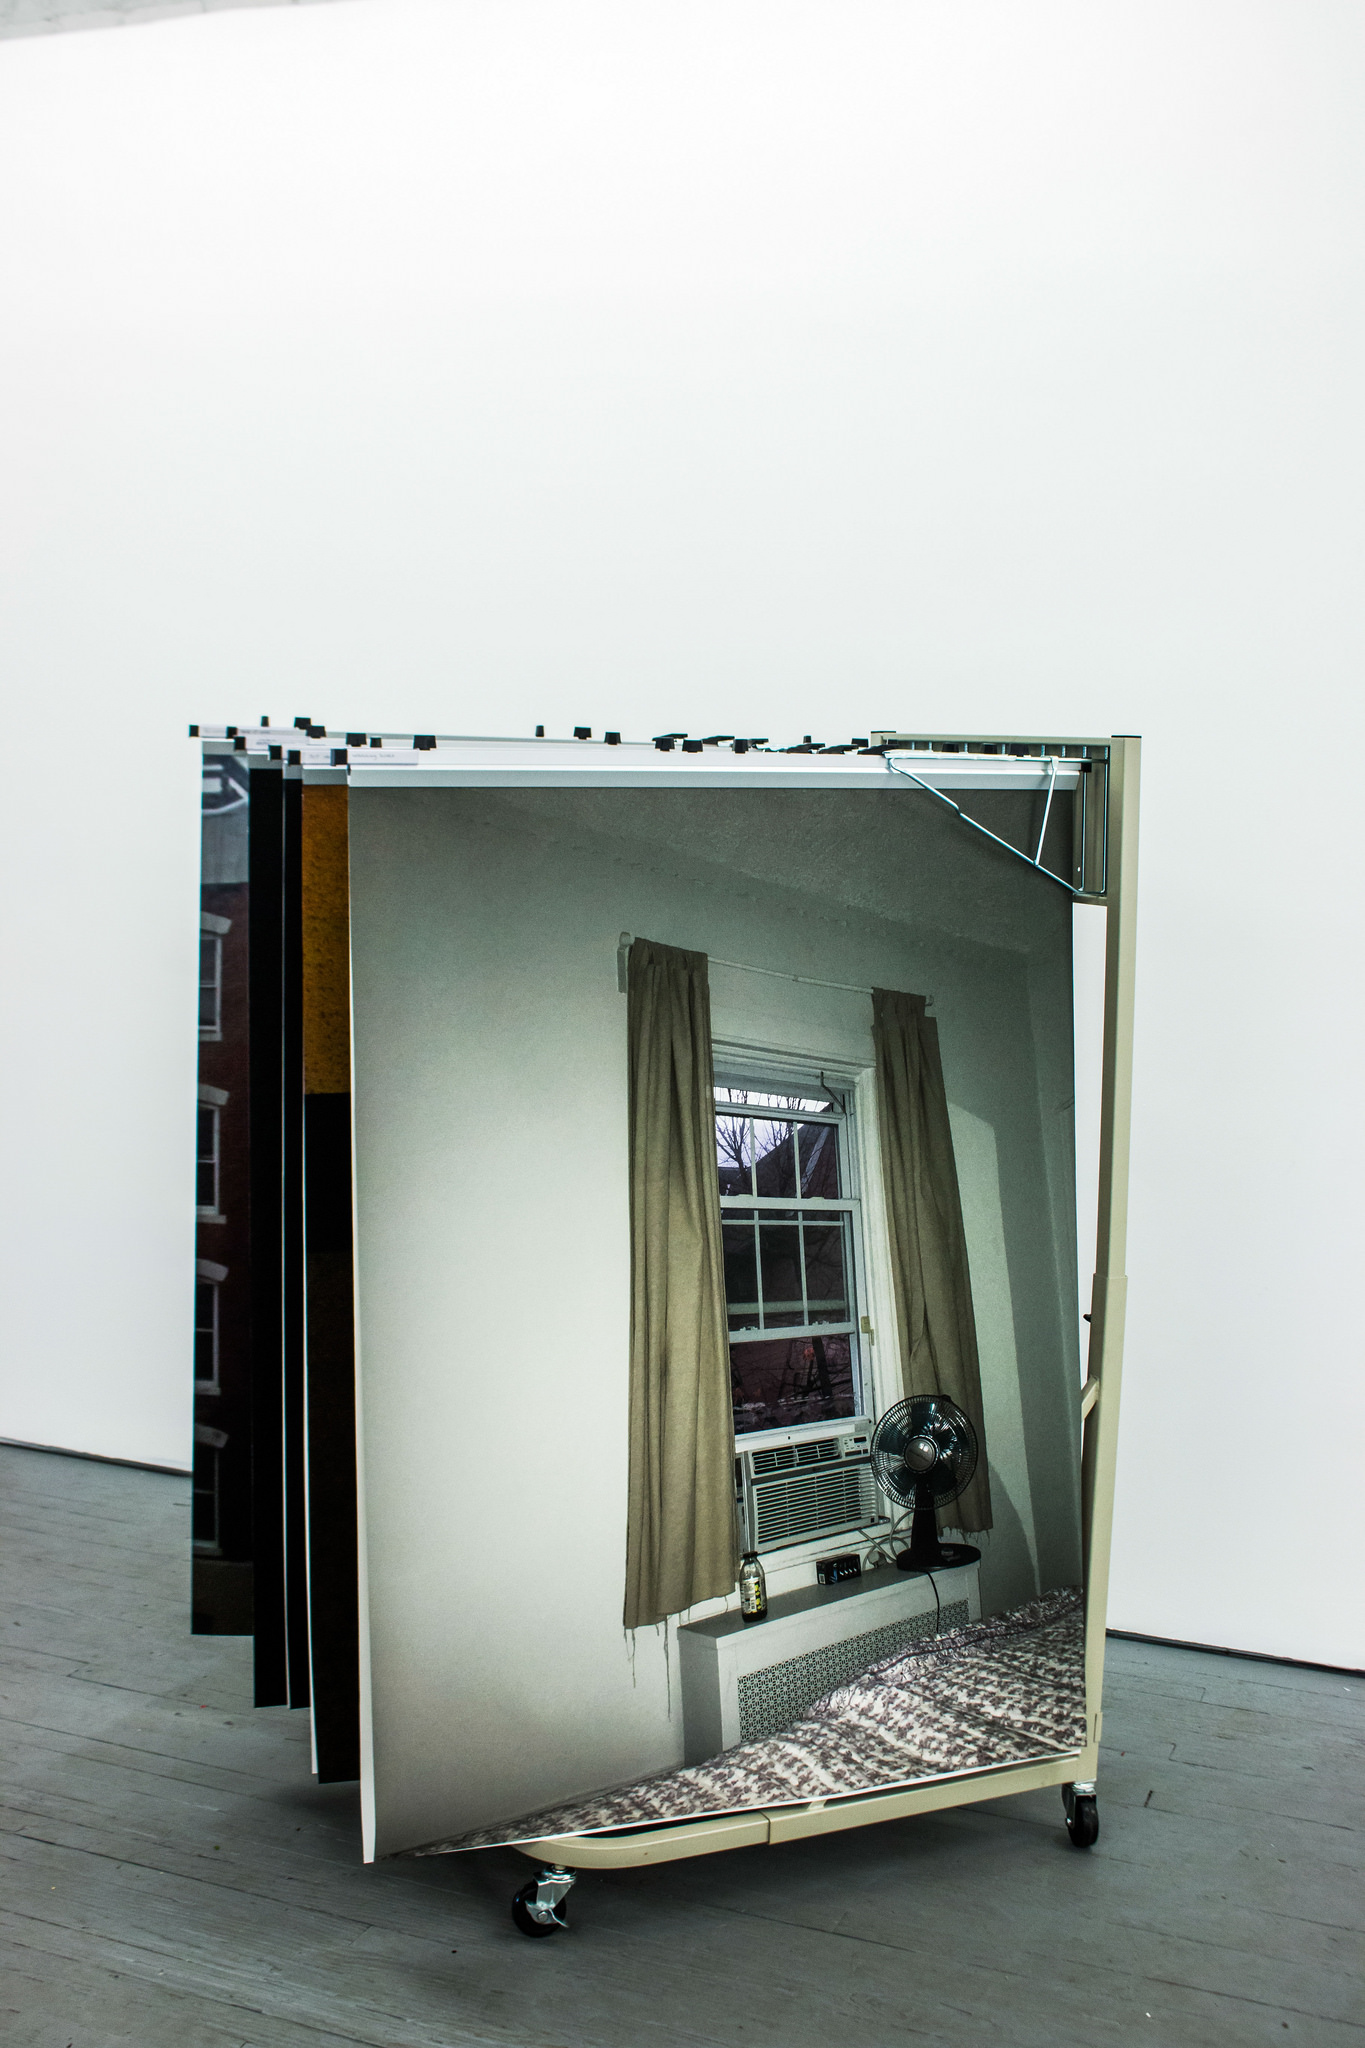  Tzirel Kaminetzky’s “Soft Archive,” a sculpture of large scale iPhone photos that are at once stunning and mundane, and Sarah Brewington’s “Present,” a nonspecific cityscape constructed from images on mirrors captured on expired film, scanned and pr